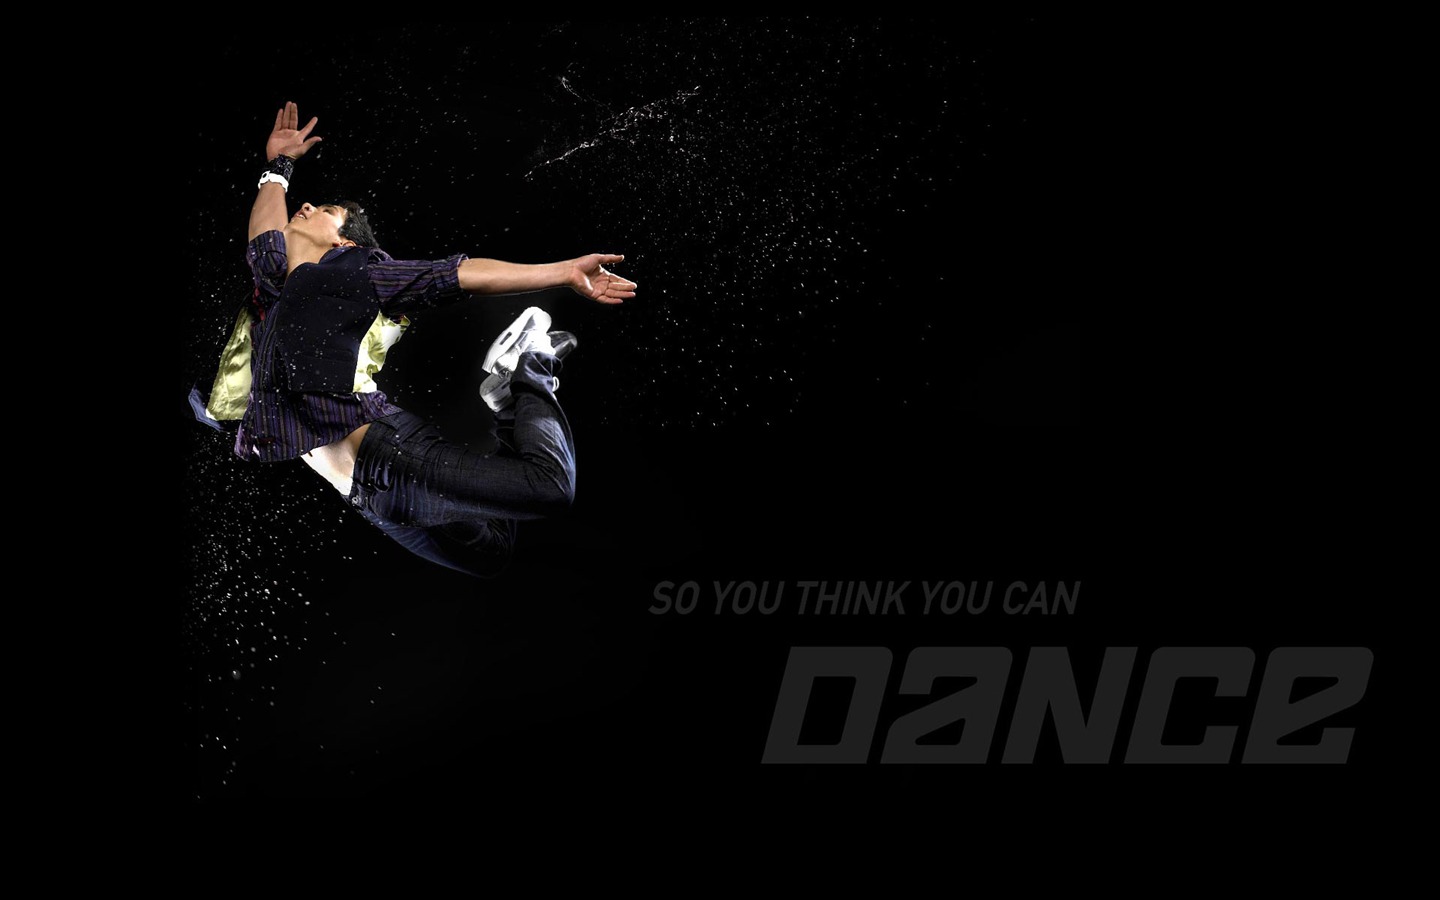 So You Think You Can Dance 舞林争霸 壁纸(一)8 - 1440x900